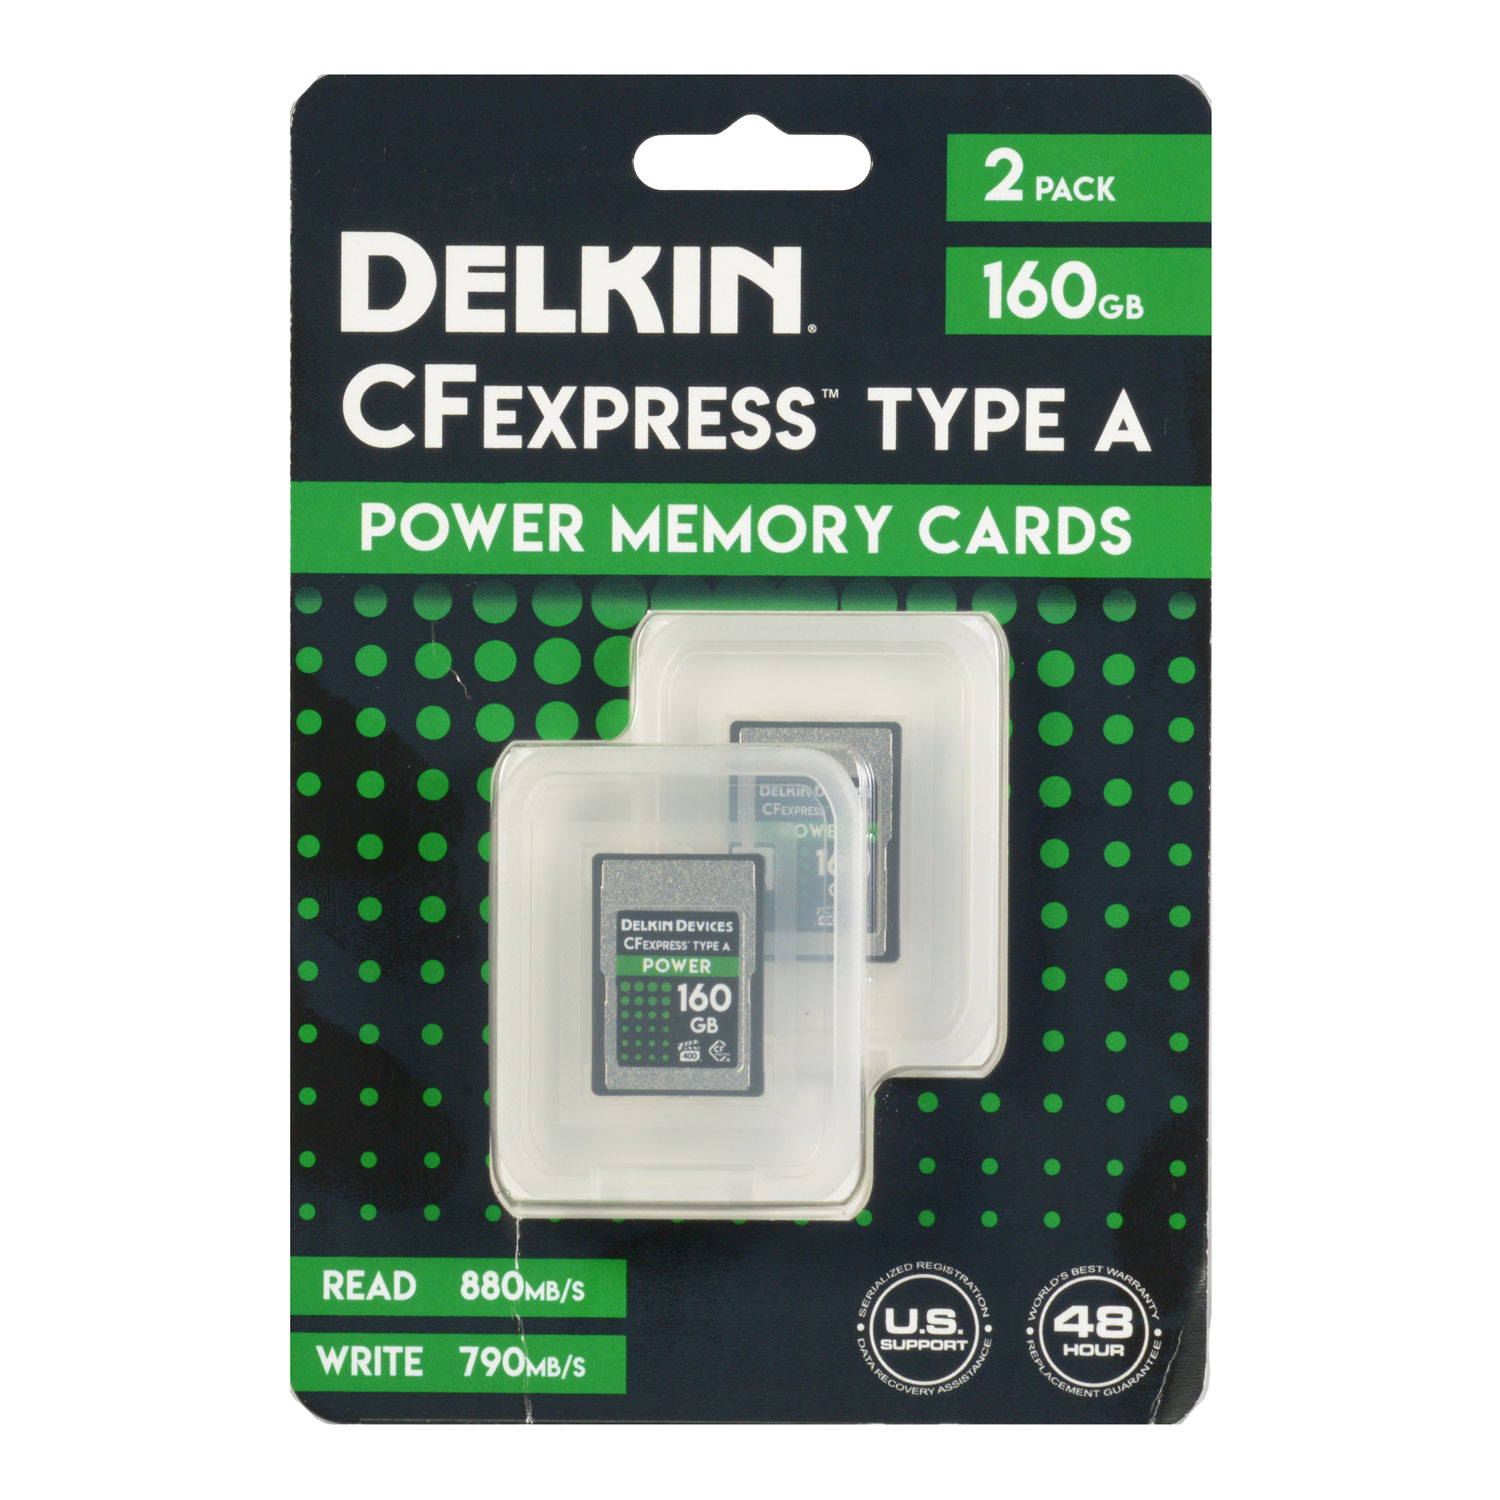 Need Faster Memory Cards. Try These Top Delkin SD Options